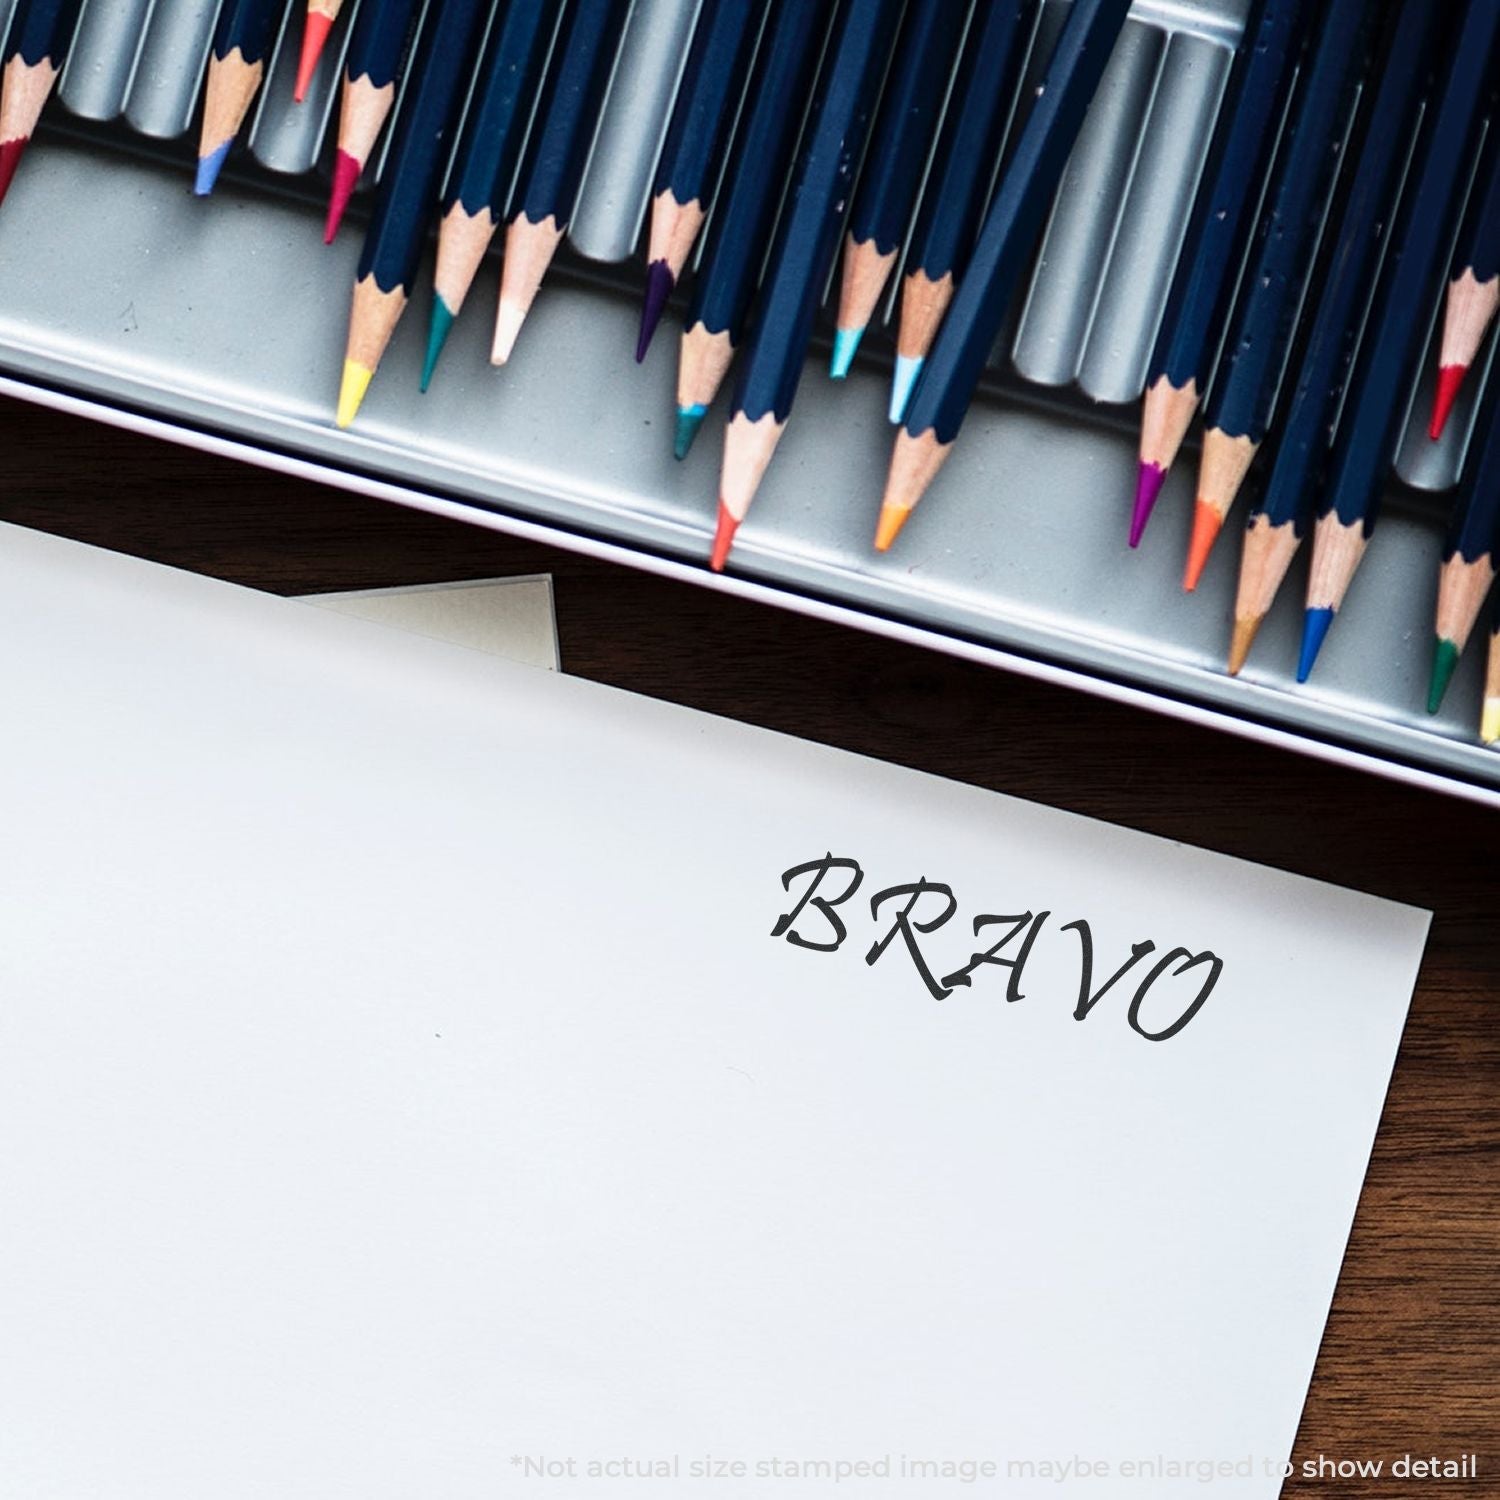 A self-inking stamp with a stamped image showing how the text "BRAVO"  is displayed after stamping.